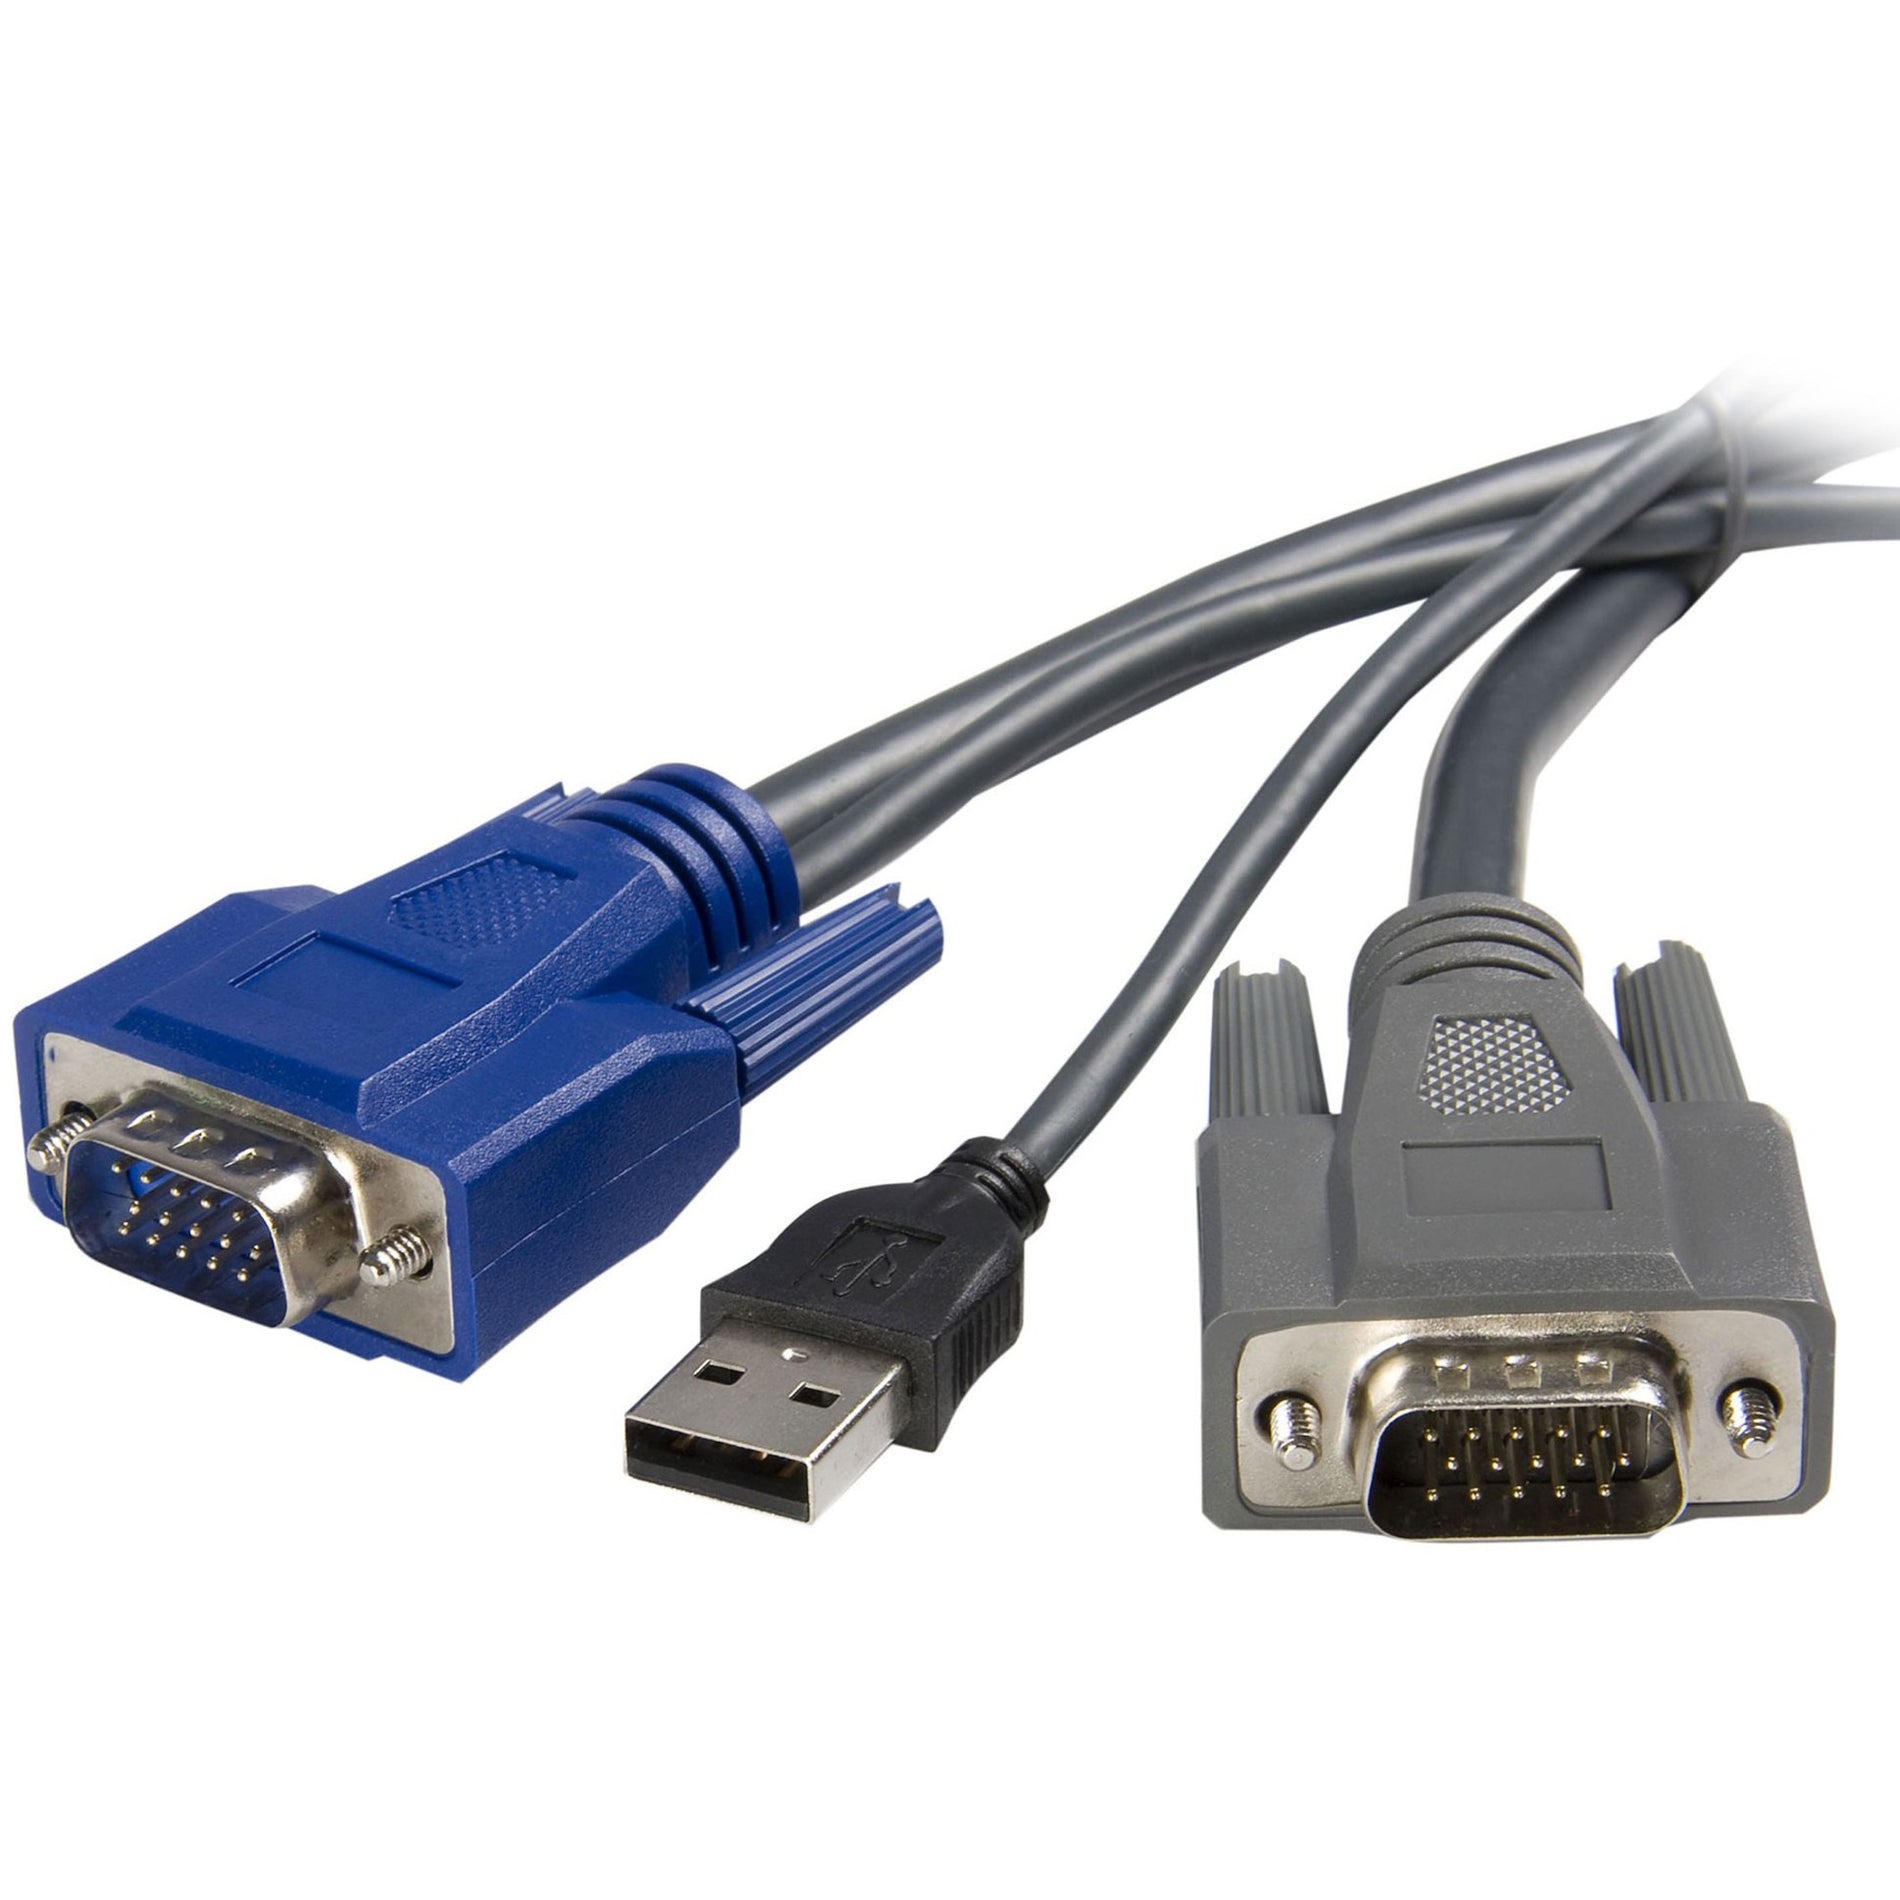 StarTech.com SVUSBVGA10 Ultra-Thin USB VGA 2-in-1 KVM Cable, 10 ft, High Quality, Lifetime Warranty [Discontinued]